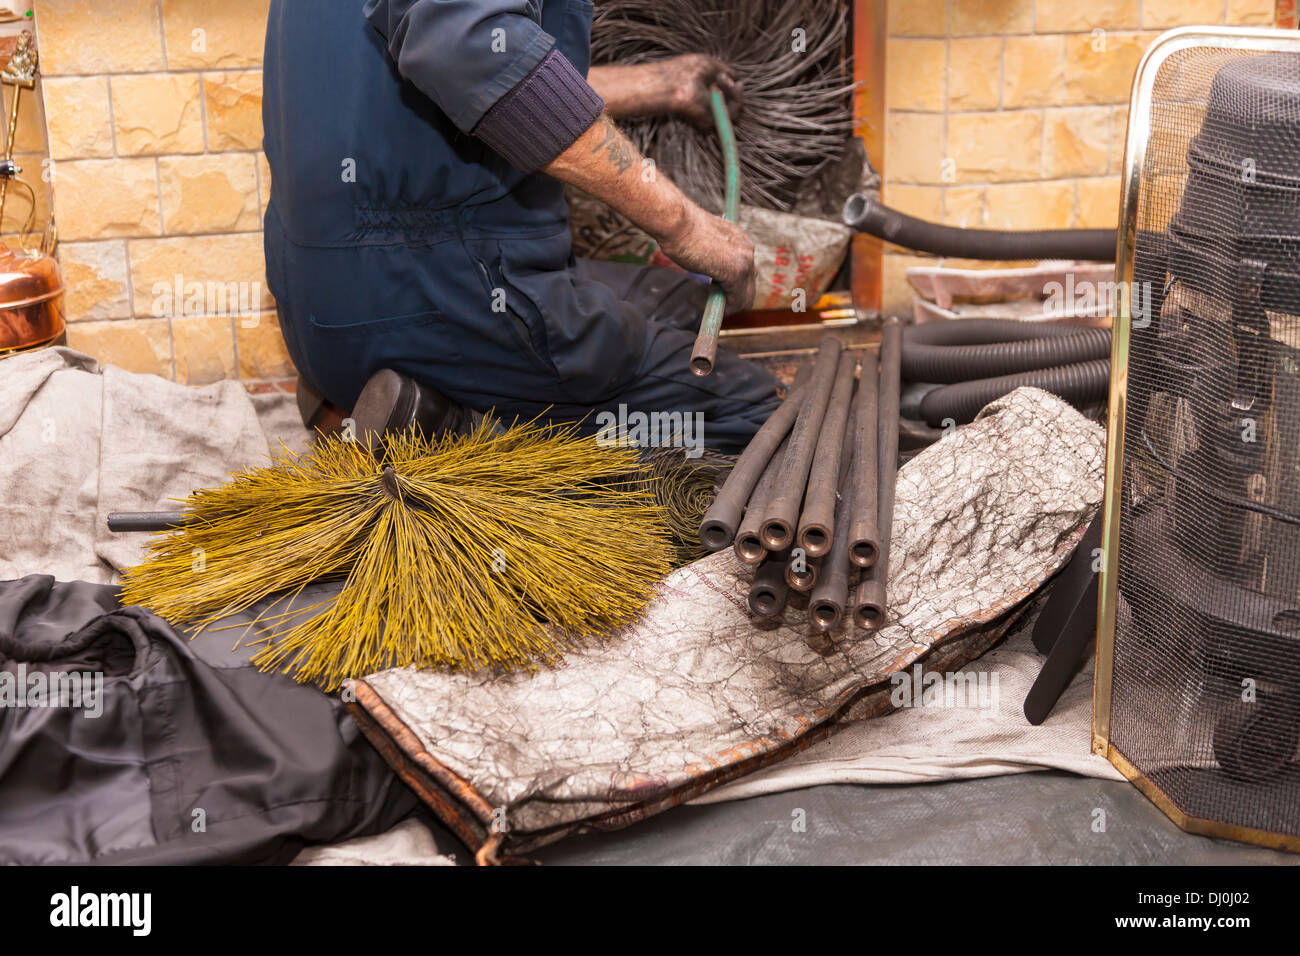 Sweep cleaning a domestic fireplace in a lounge Stock Photo